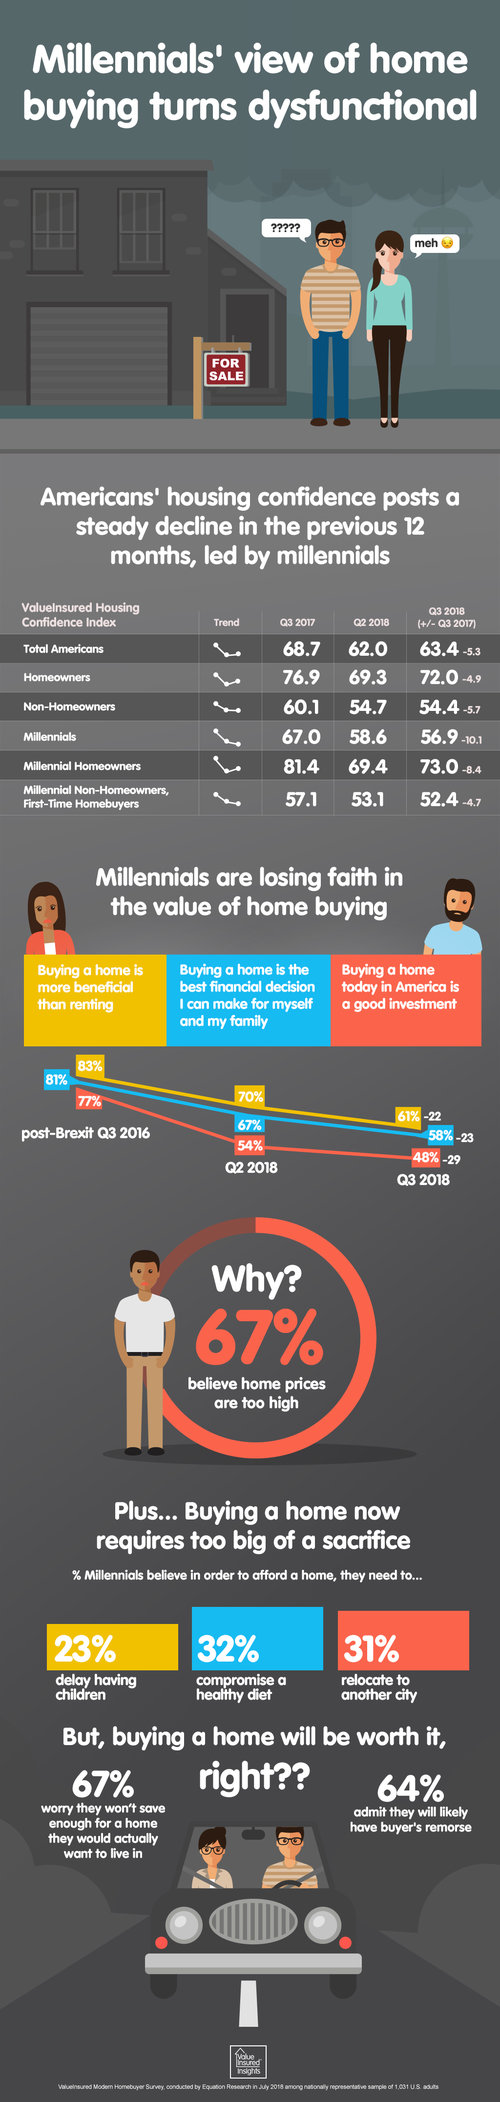 The hopes that Millennials will fuel a new wave of homebuying may have hit a pothole, according to the latest Modern Homebuyer Survey released by ValueInsured